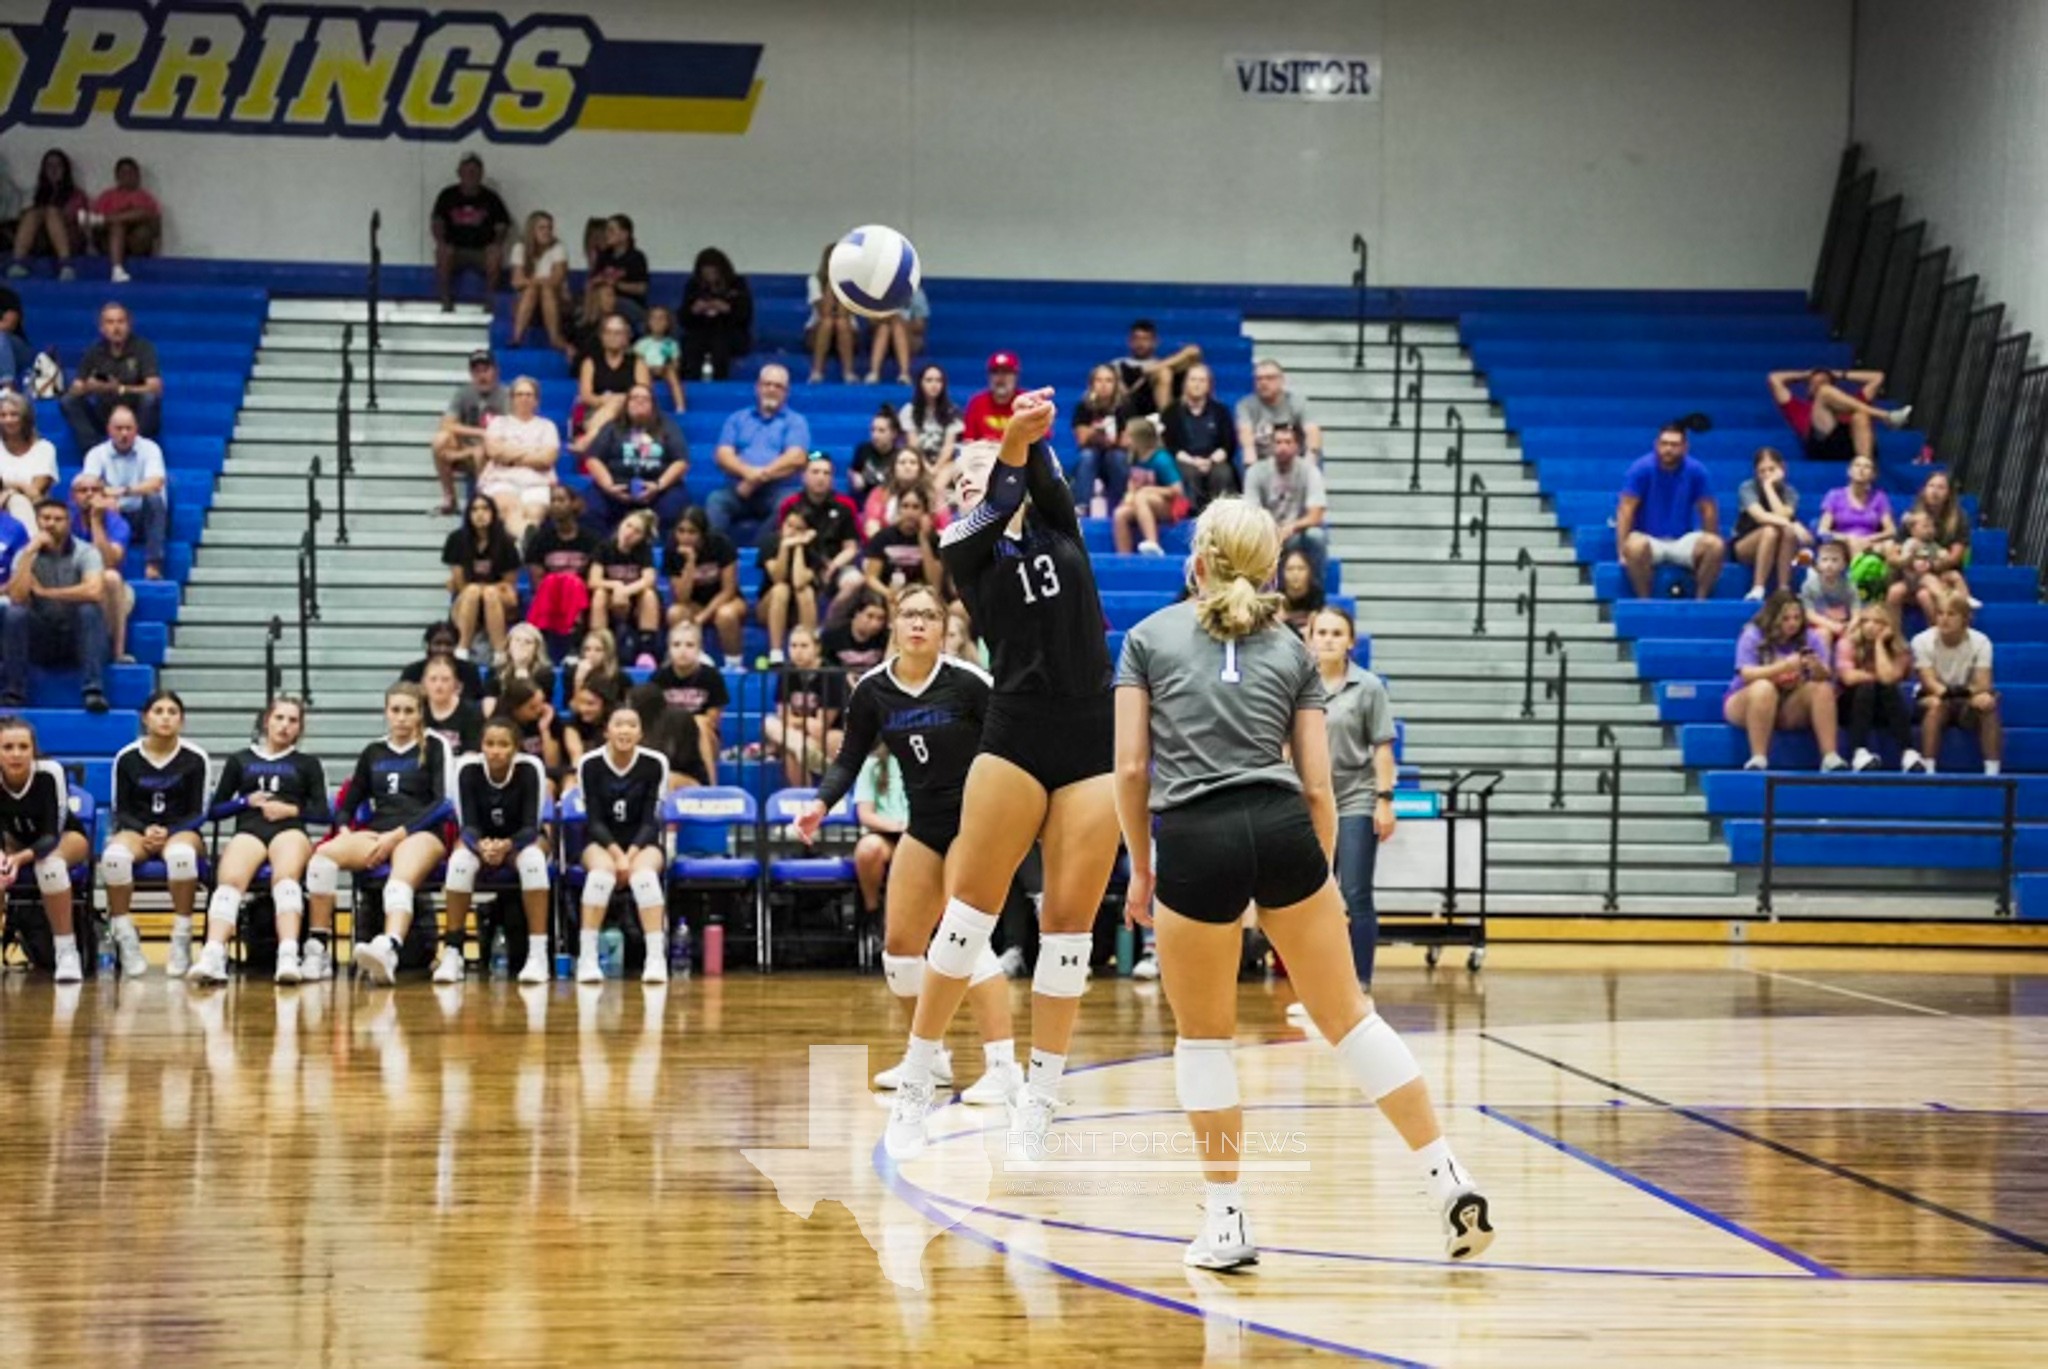 Lady Cats take district opener, extend win streak to 3 games